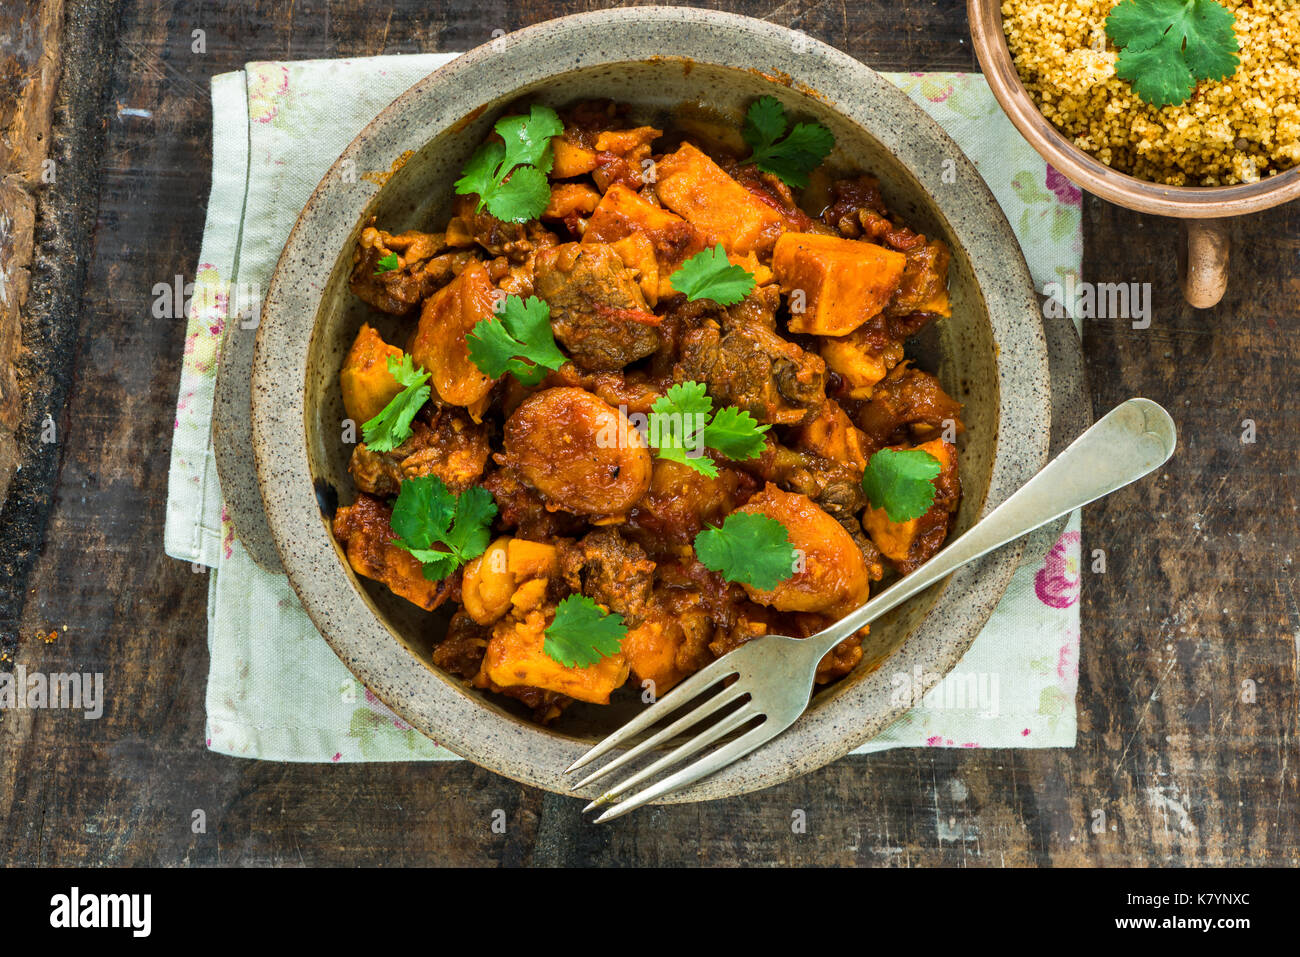 Maroccan lamb tajine with couscous garnished with fresh coriander leaves - high angle view Stock Photo